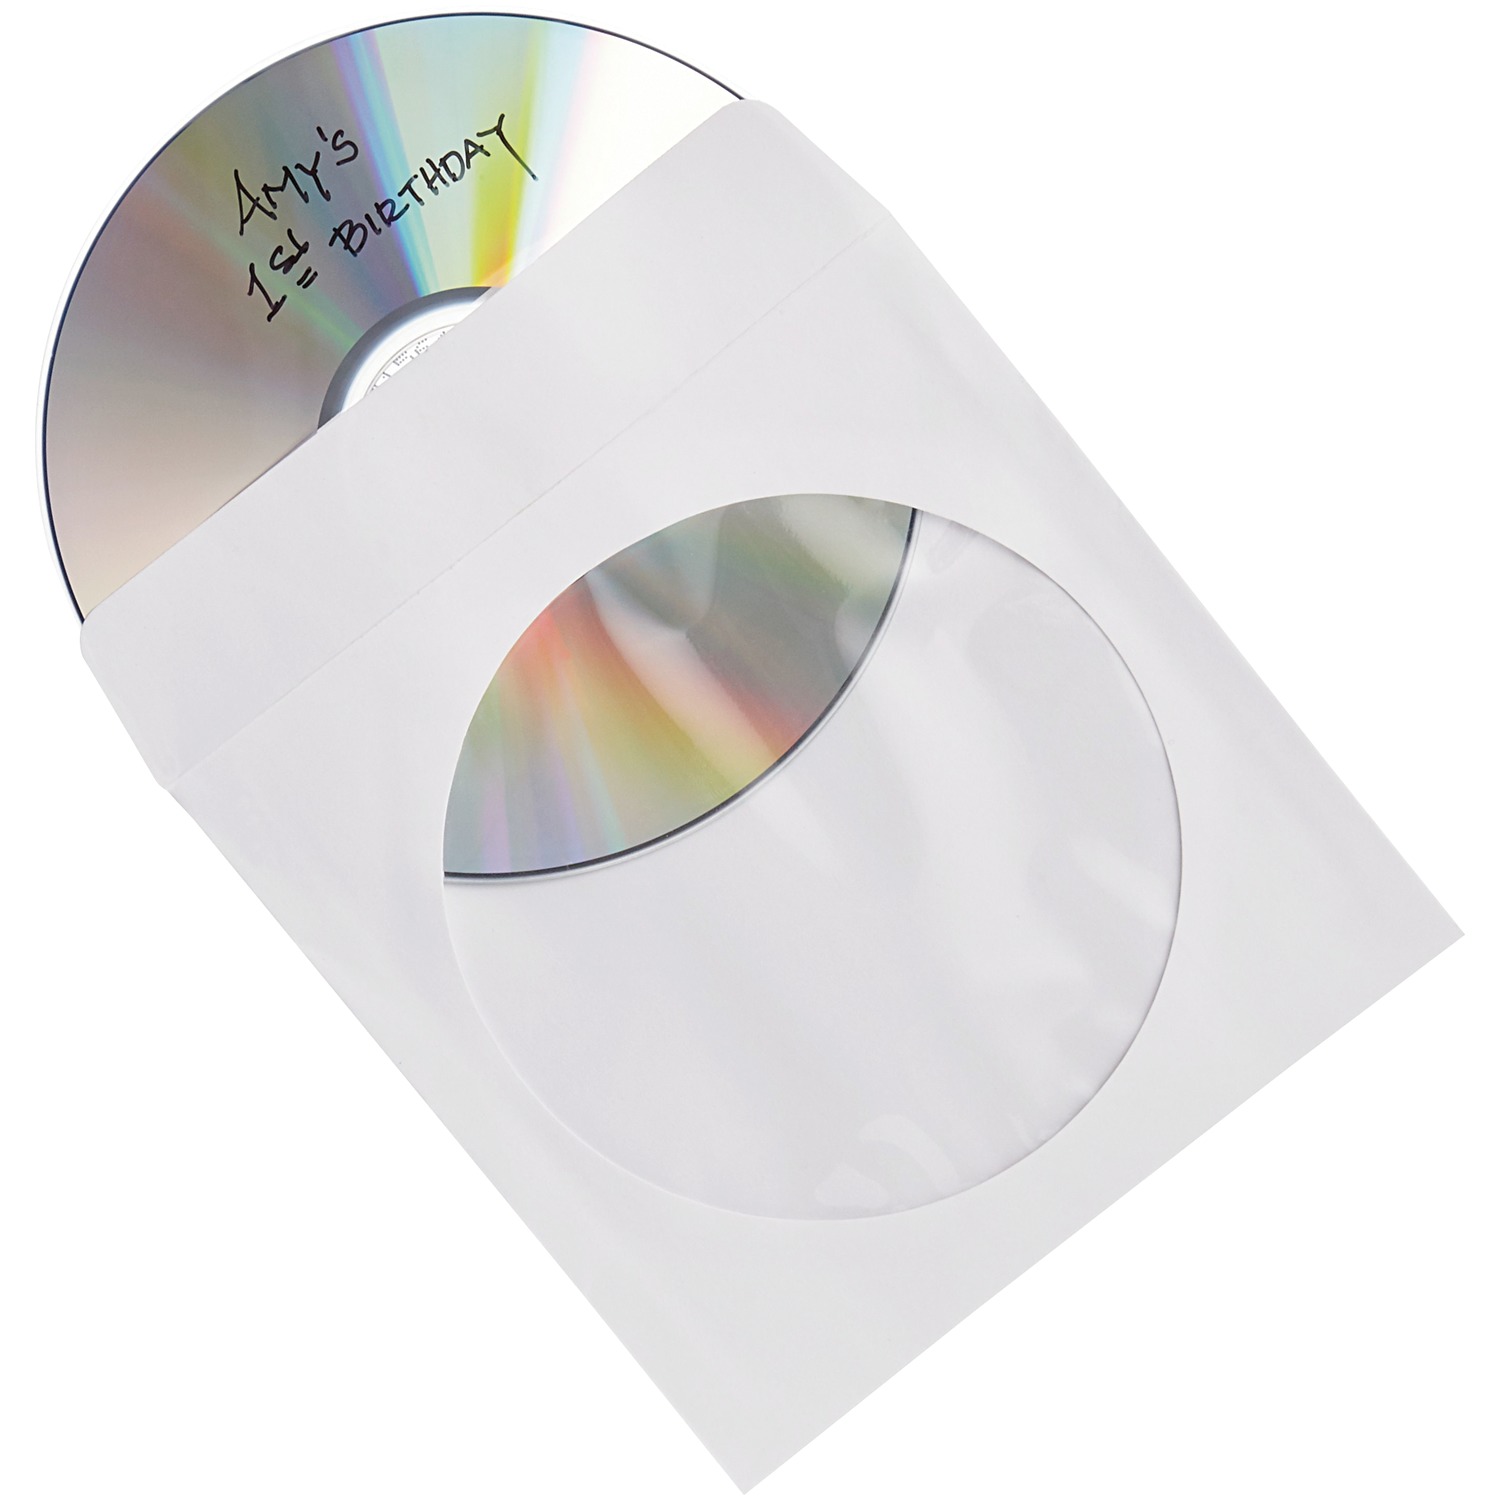 Verbatim 94554 700MB 80-Minute 52x CD-RS 100-Count Spindle and CD/DVD Paper Sleeves with Clear Window, 100-Pack - image 2 of 4